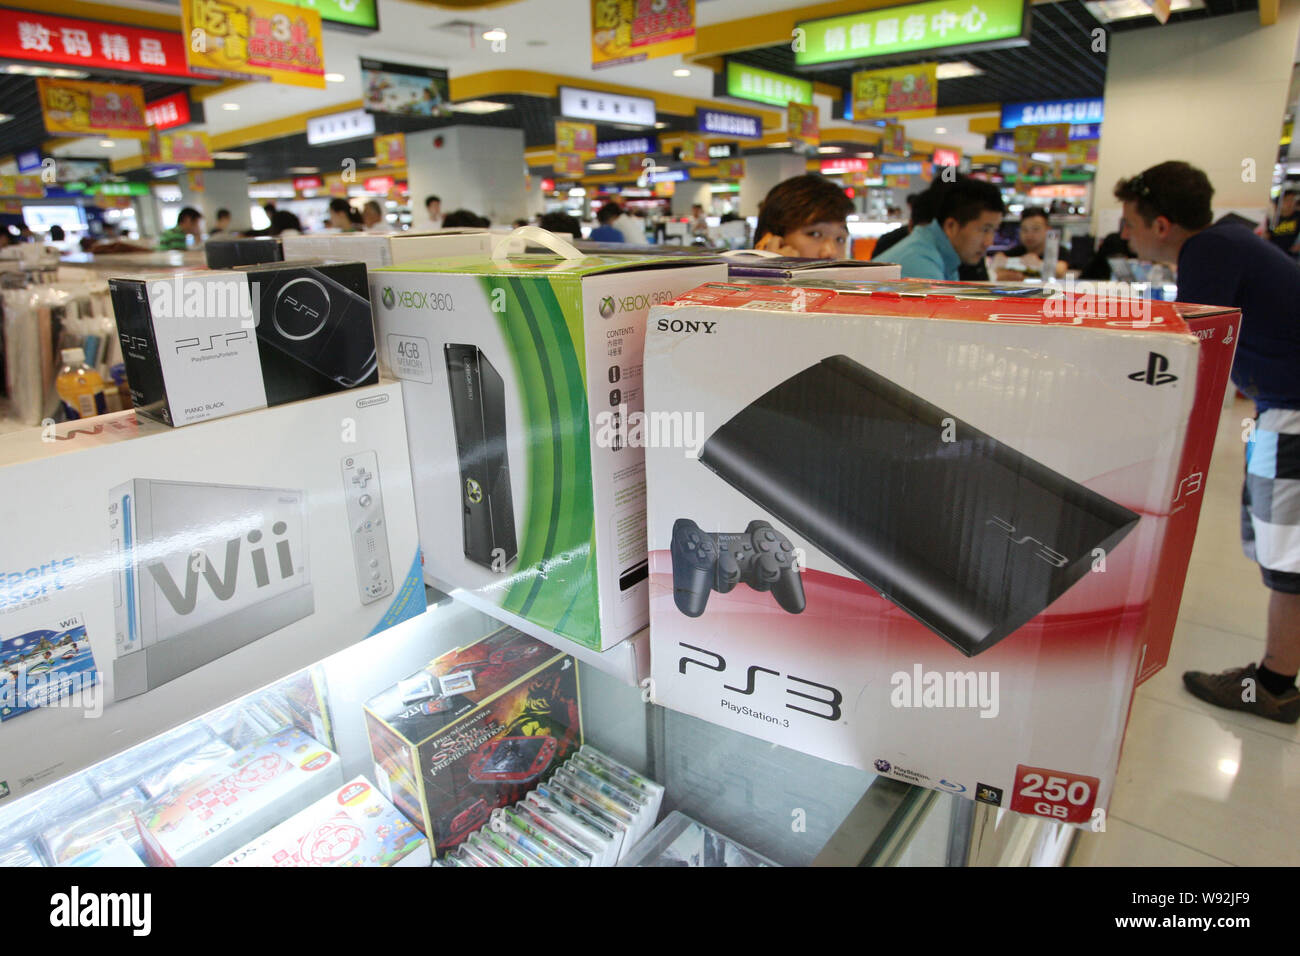 Sony Ps3 Psp Microsoft Xbox 360 And Nintendo Wii Game Consoles Are For Sale At A Stall In A Digital Products Mall In Shanghai China 10 July 13 Stock Photo Alamy